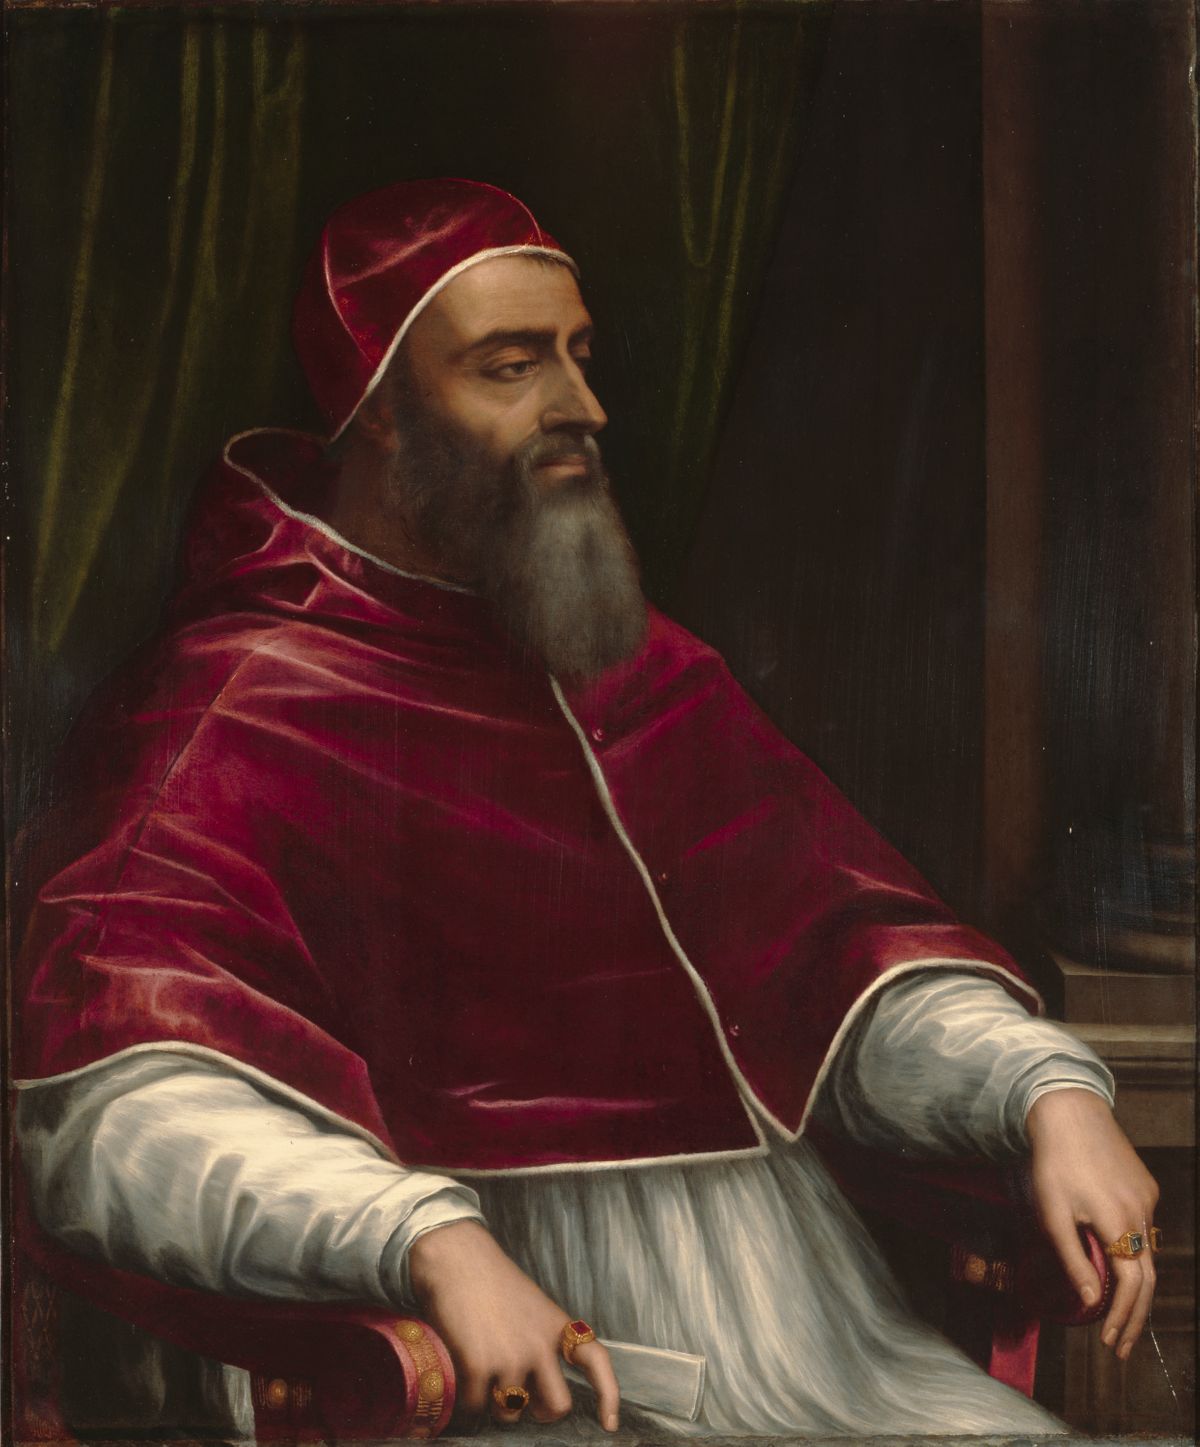 Pope Clement VII by Sebastiano del Piombo (1531) - Public Domain Catholic Painting